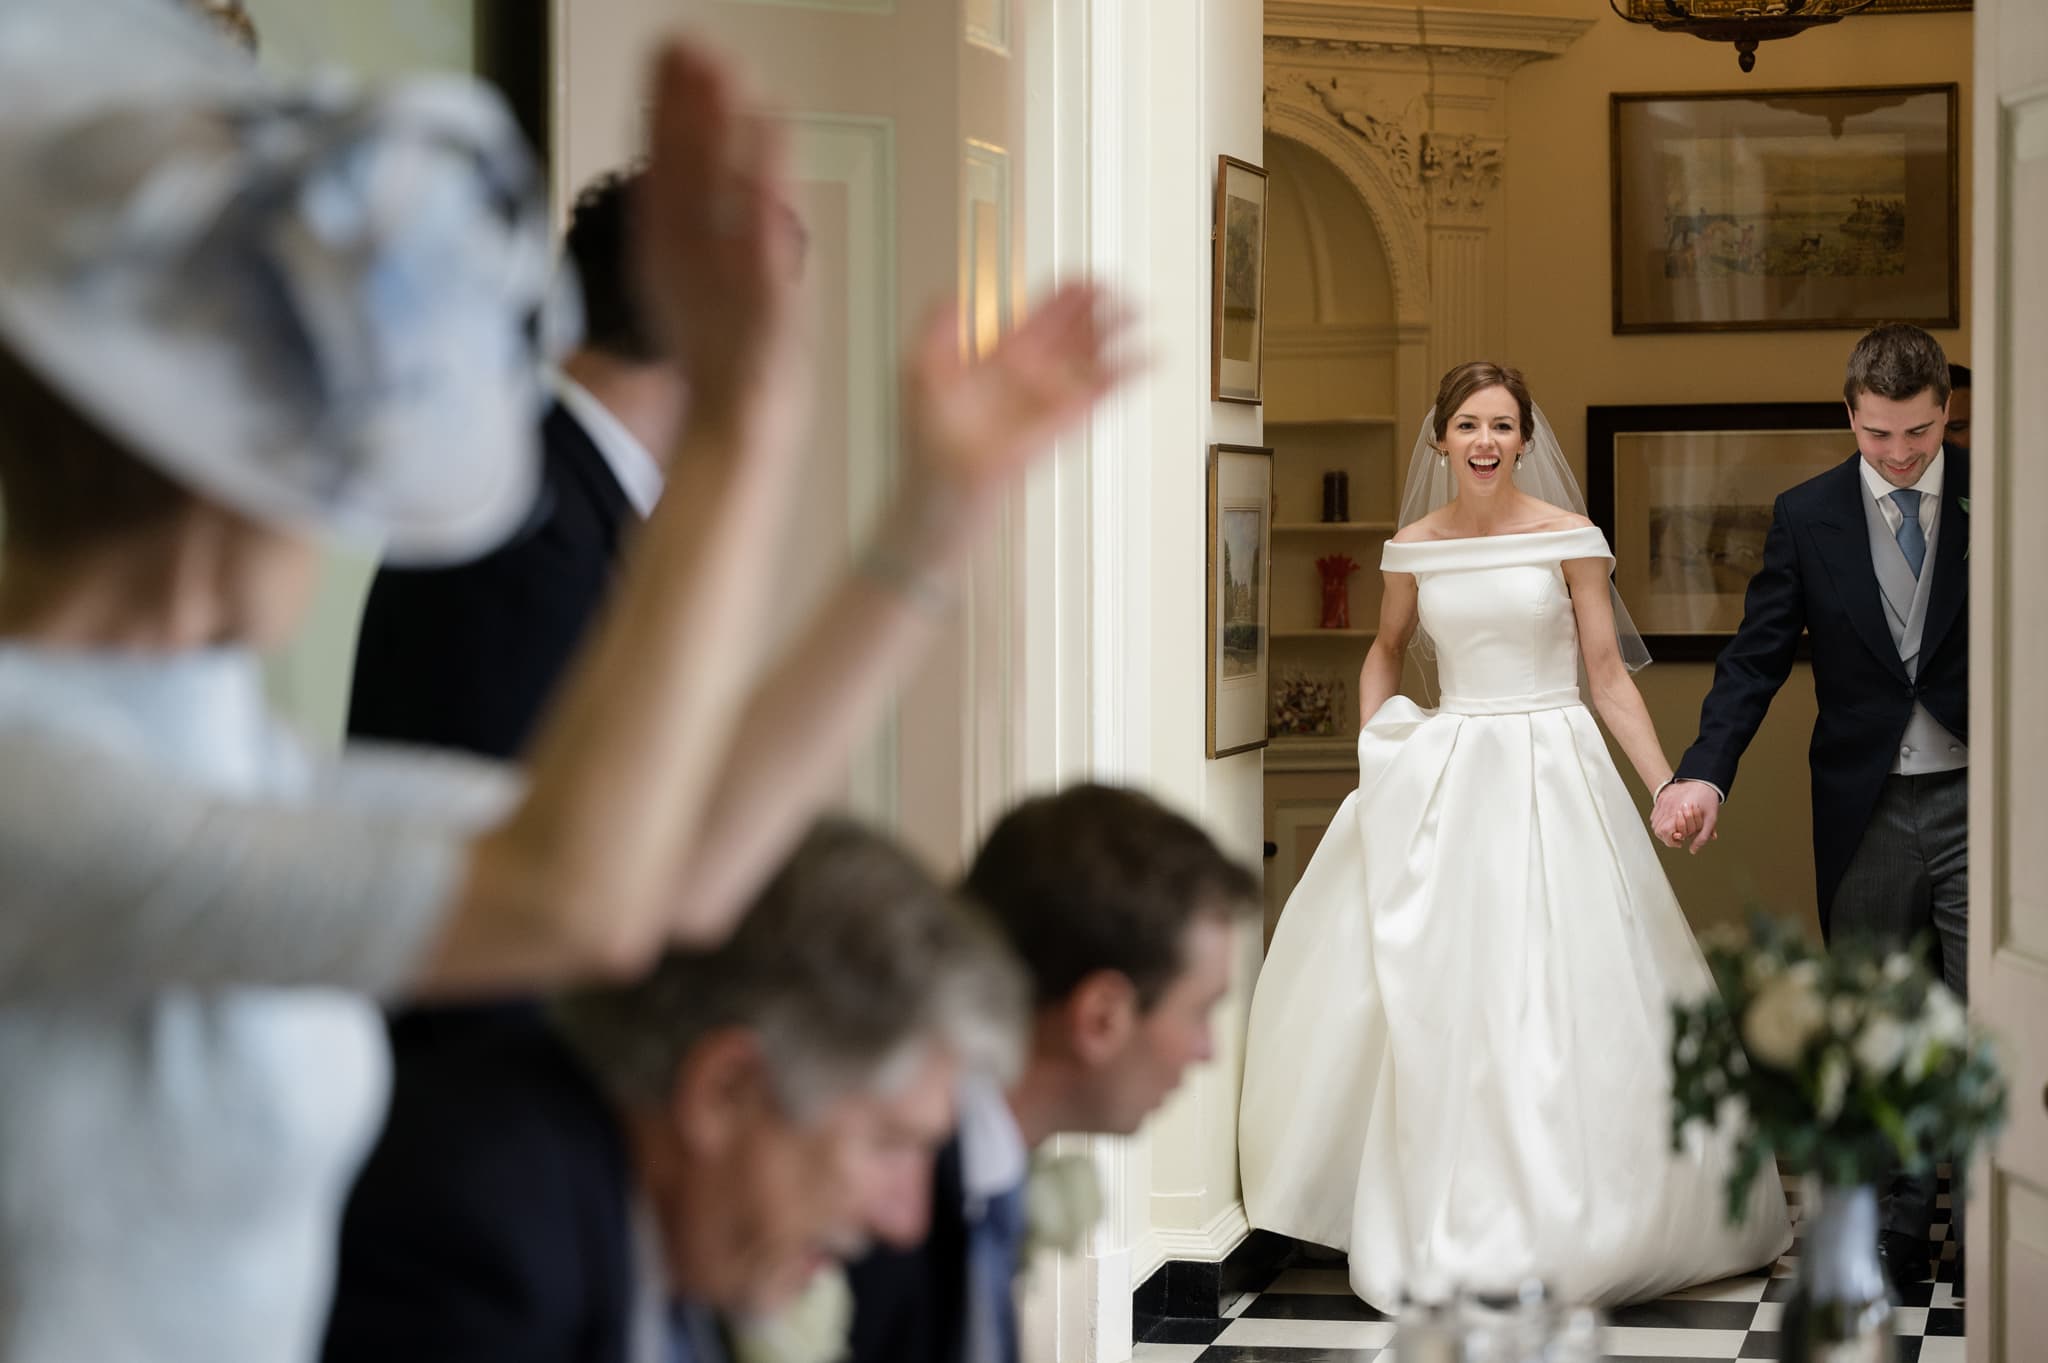 Bride and groom entering room for dinner with one of their guests clapping in the foreground